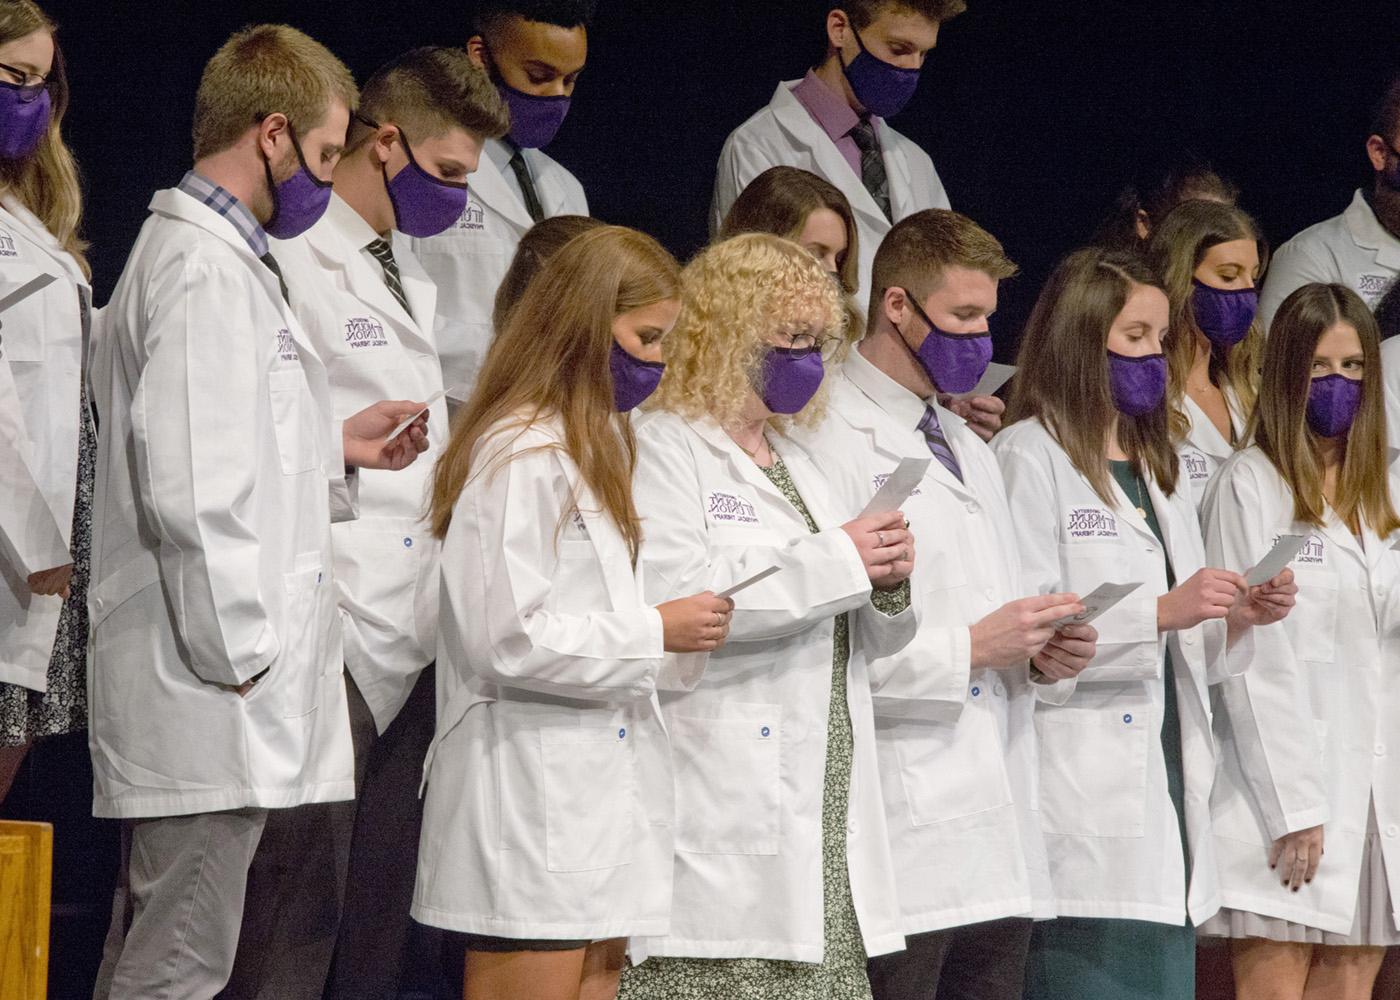 Students reading oath of the physical therapist at Mount Union's PT白大衣 ceremony